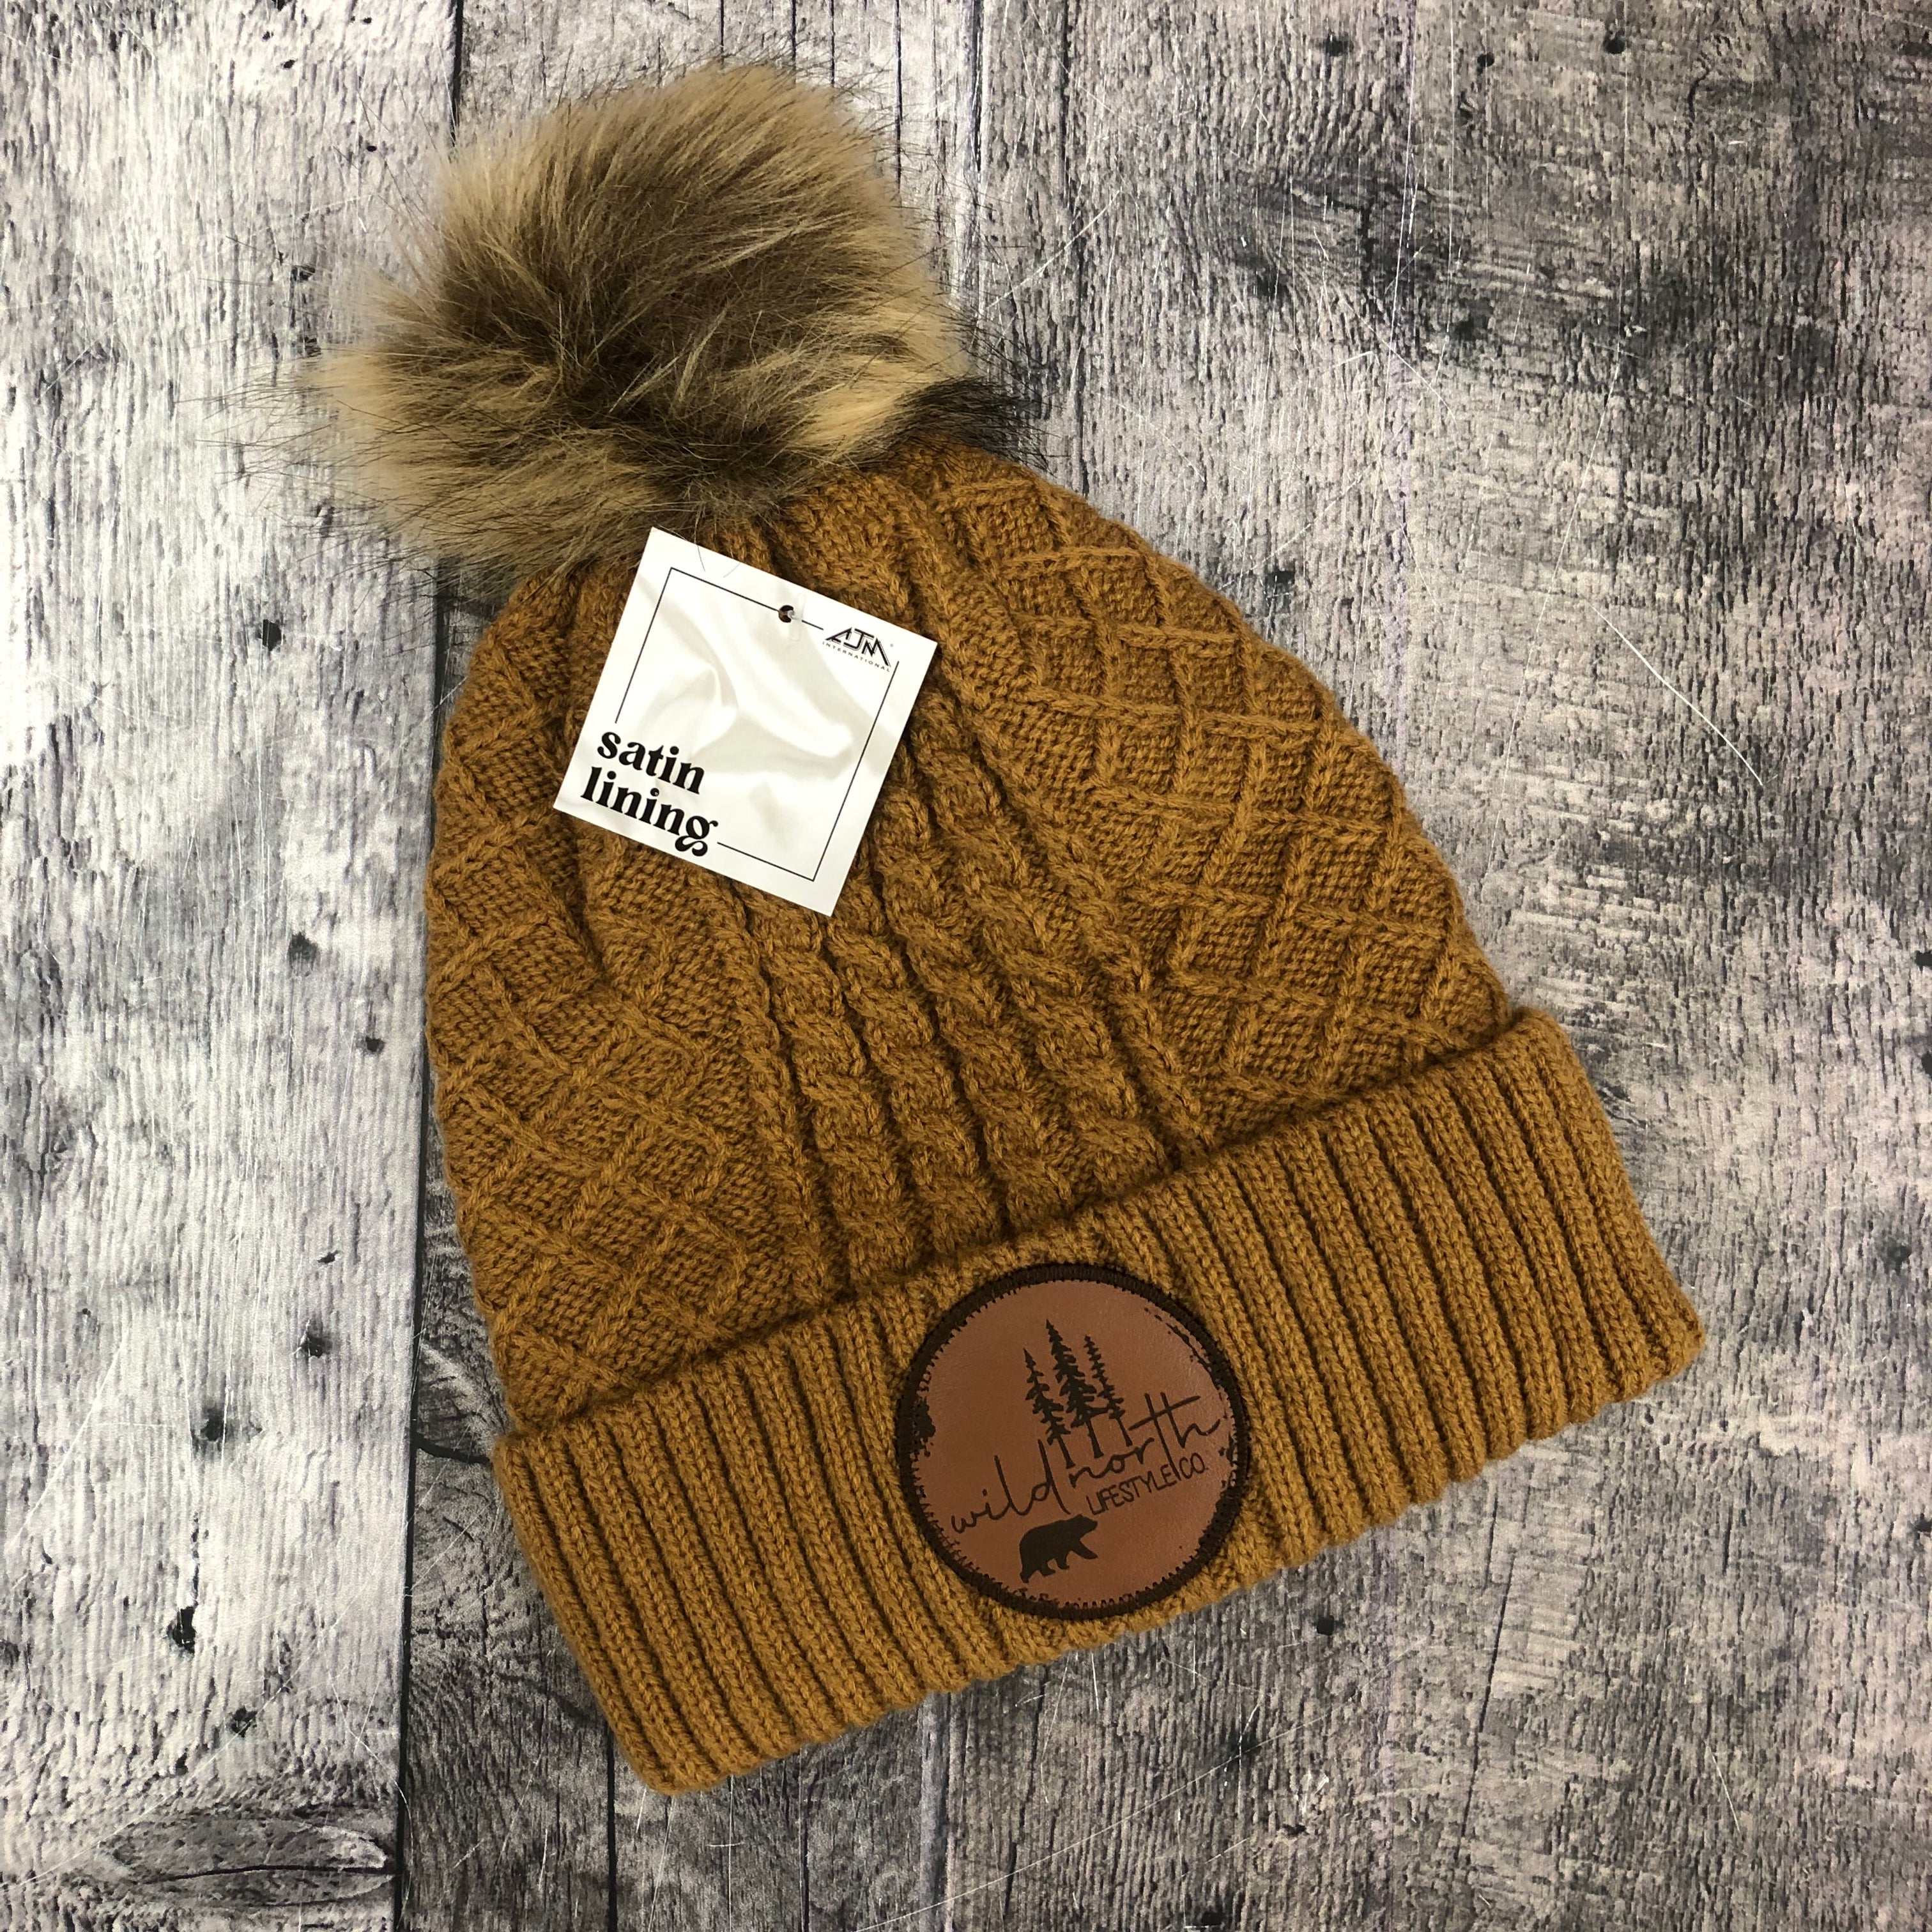 Wild North Jacquard Cable Knit Toque - Caramel Satin Lined!